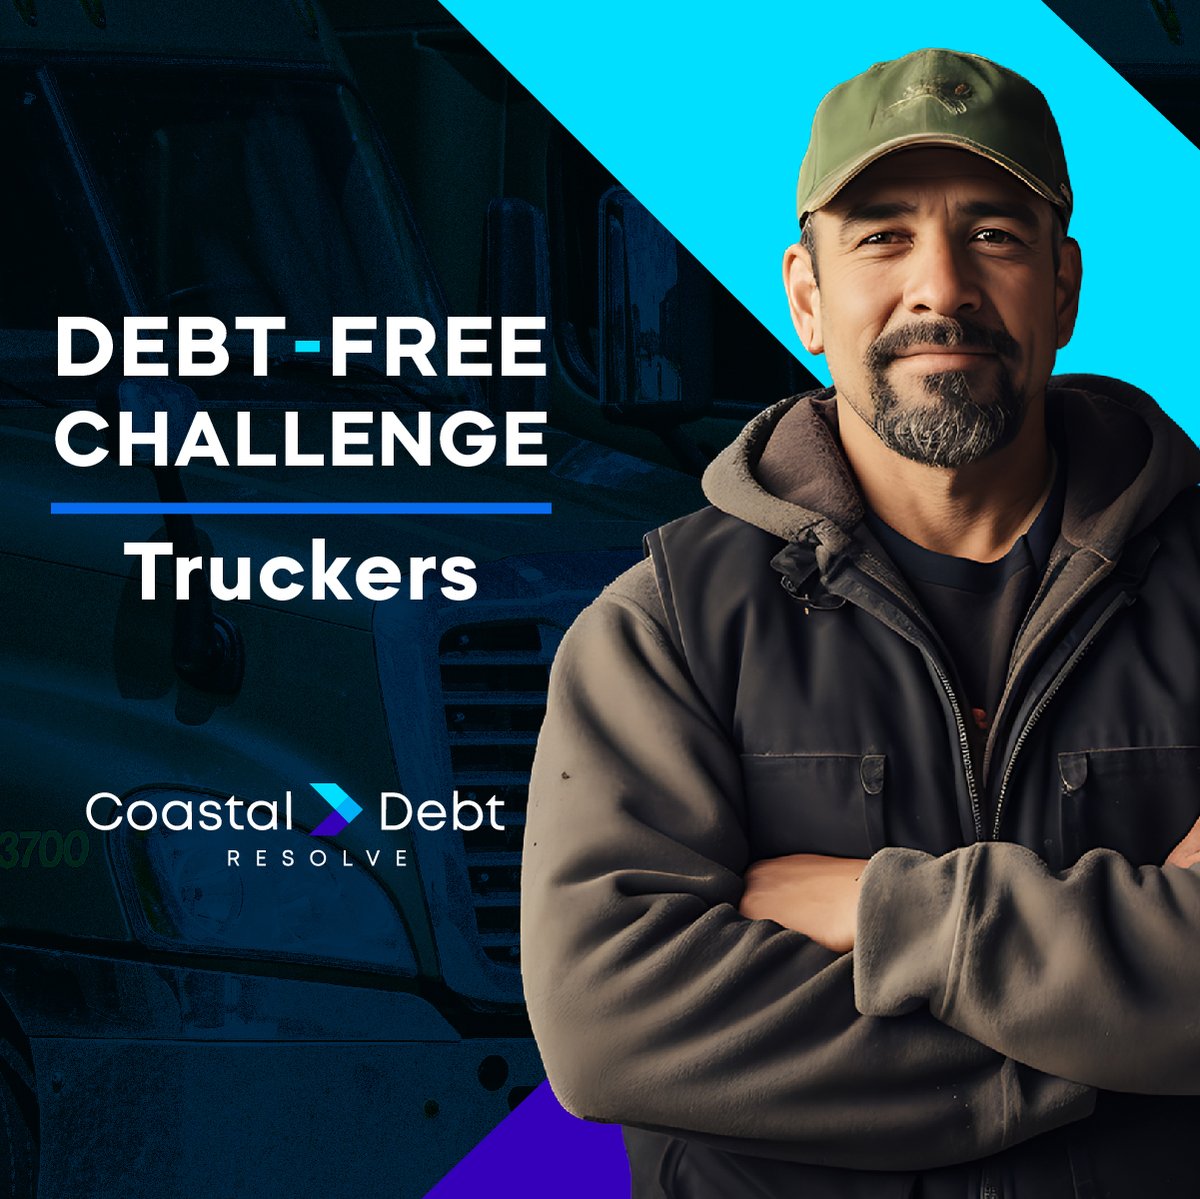 #Truckers struggling with #MerchantCashAdvance #Debt? 

Check out our latest blog and read more about our #DebtFree #challenge for the #transportation industry. 
hubs.li/Q02shKmF0

#MCADebt #ExpertAdvisors #BusinessDebt #TransportationIndustry #Trucking #DebtSettlement